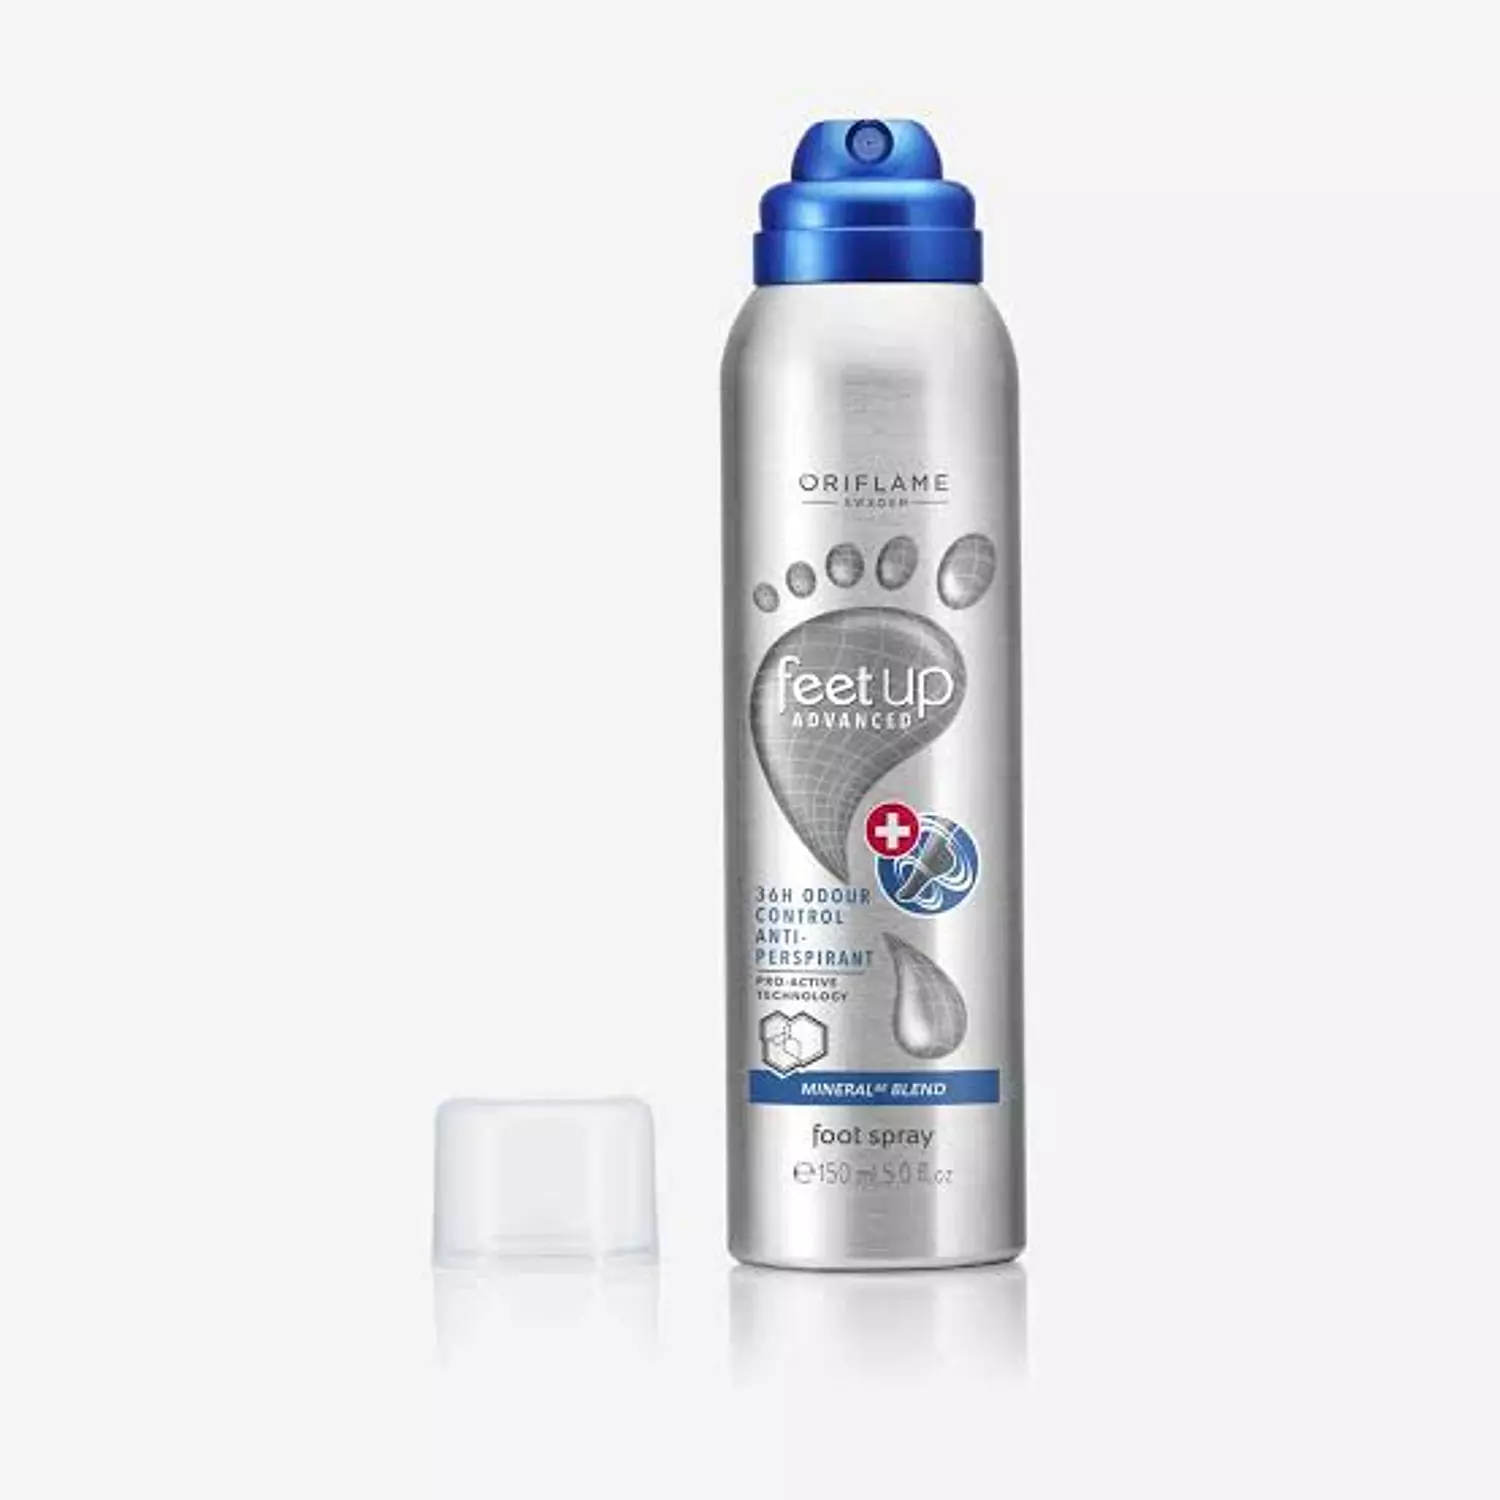 Advanced/ 36H Odour Control Anti-perspirant Foot Spray hover image